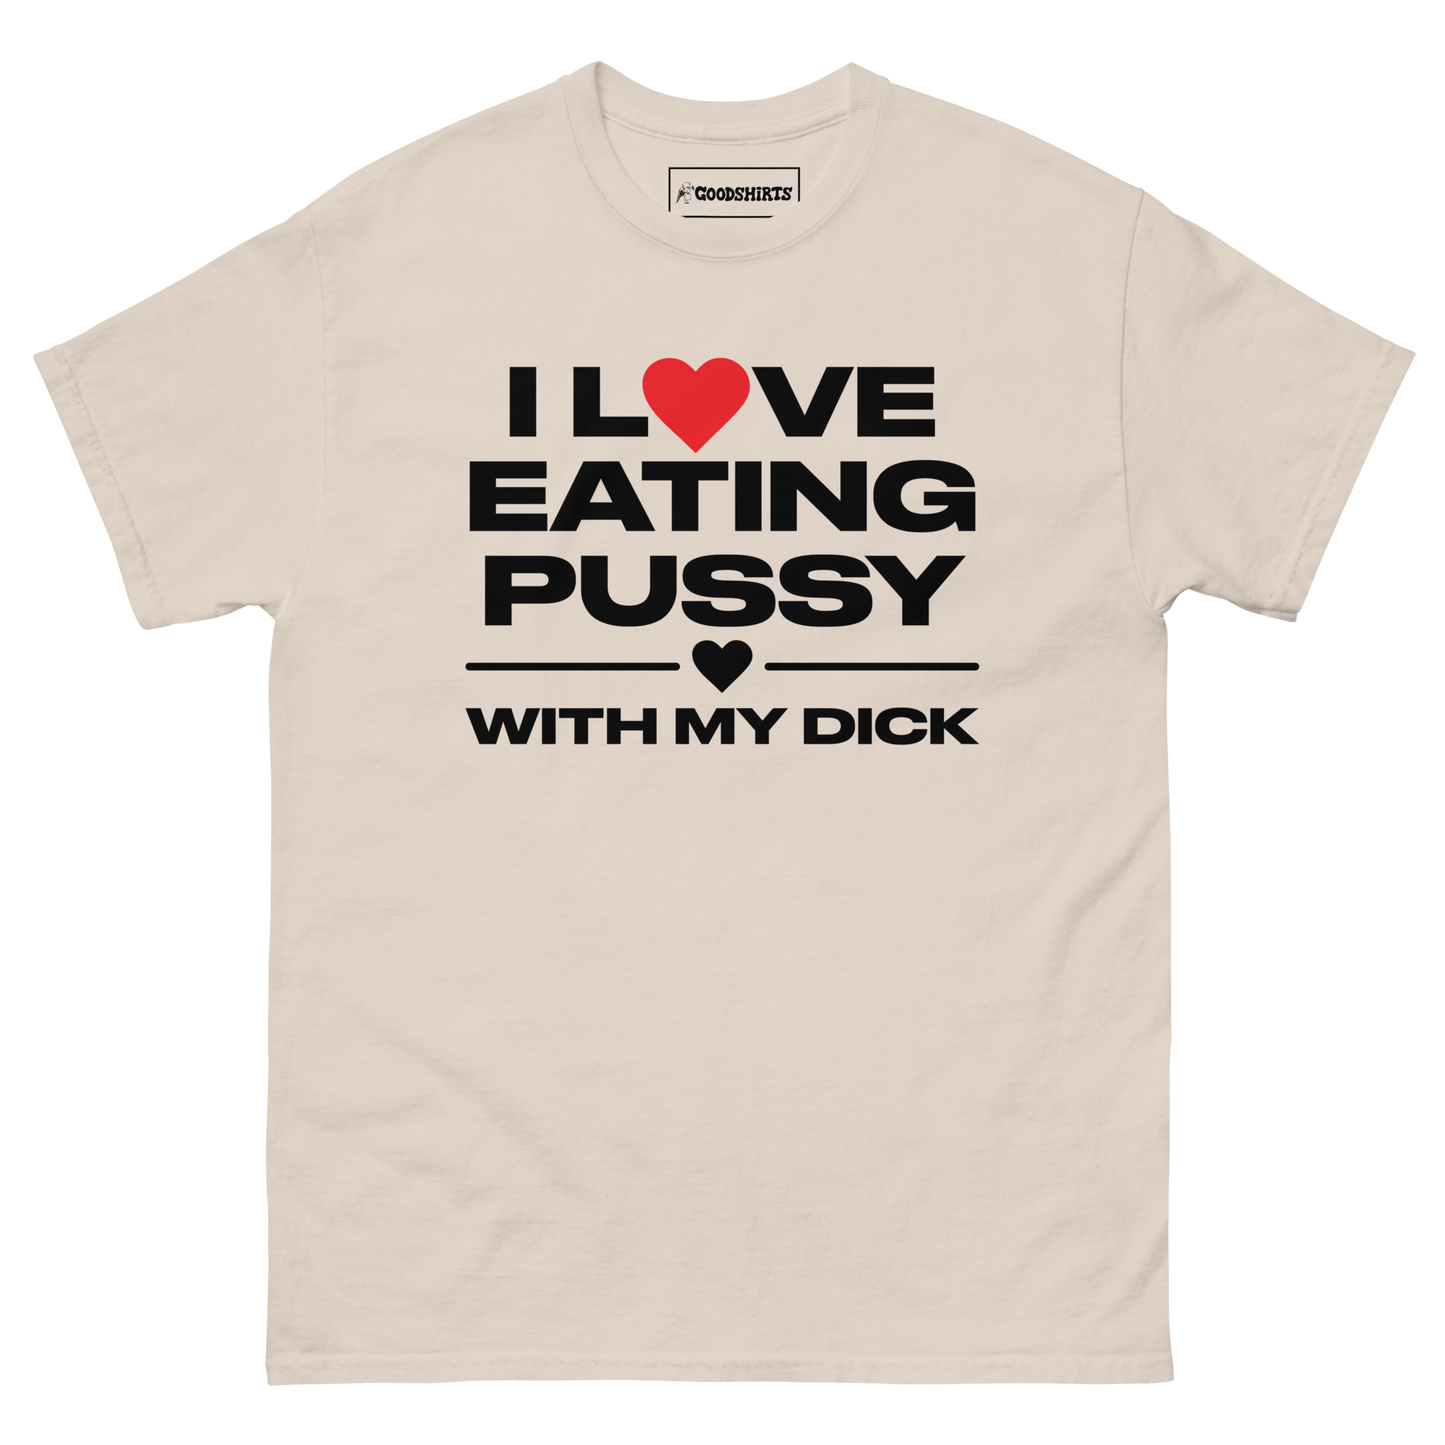 I Love Eating Pussy With My Dick.